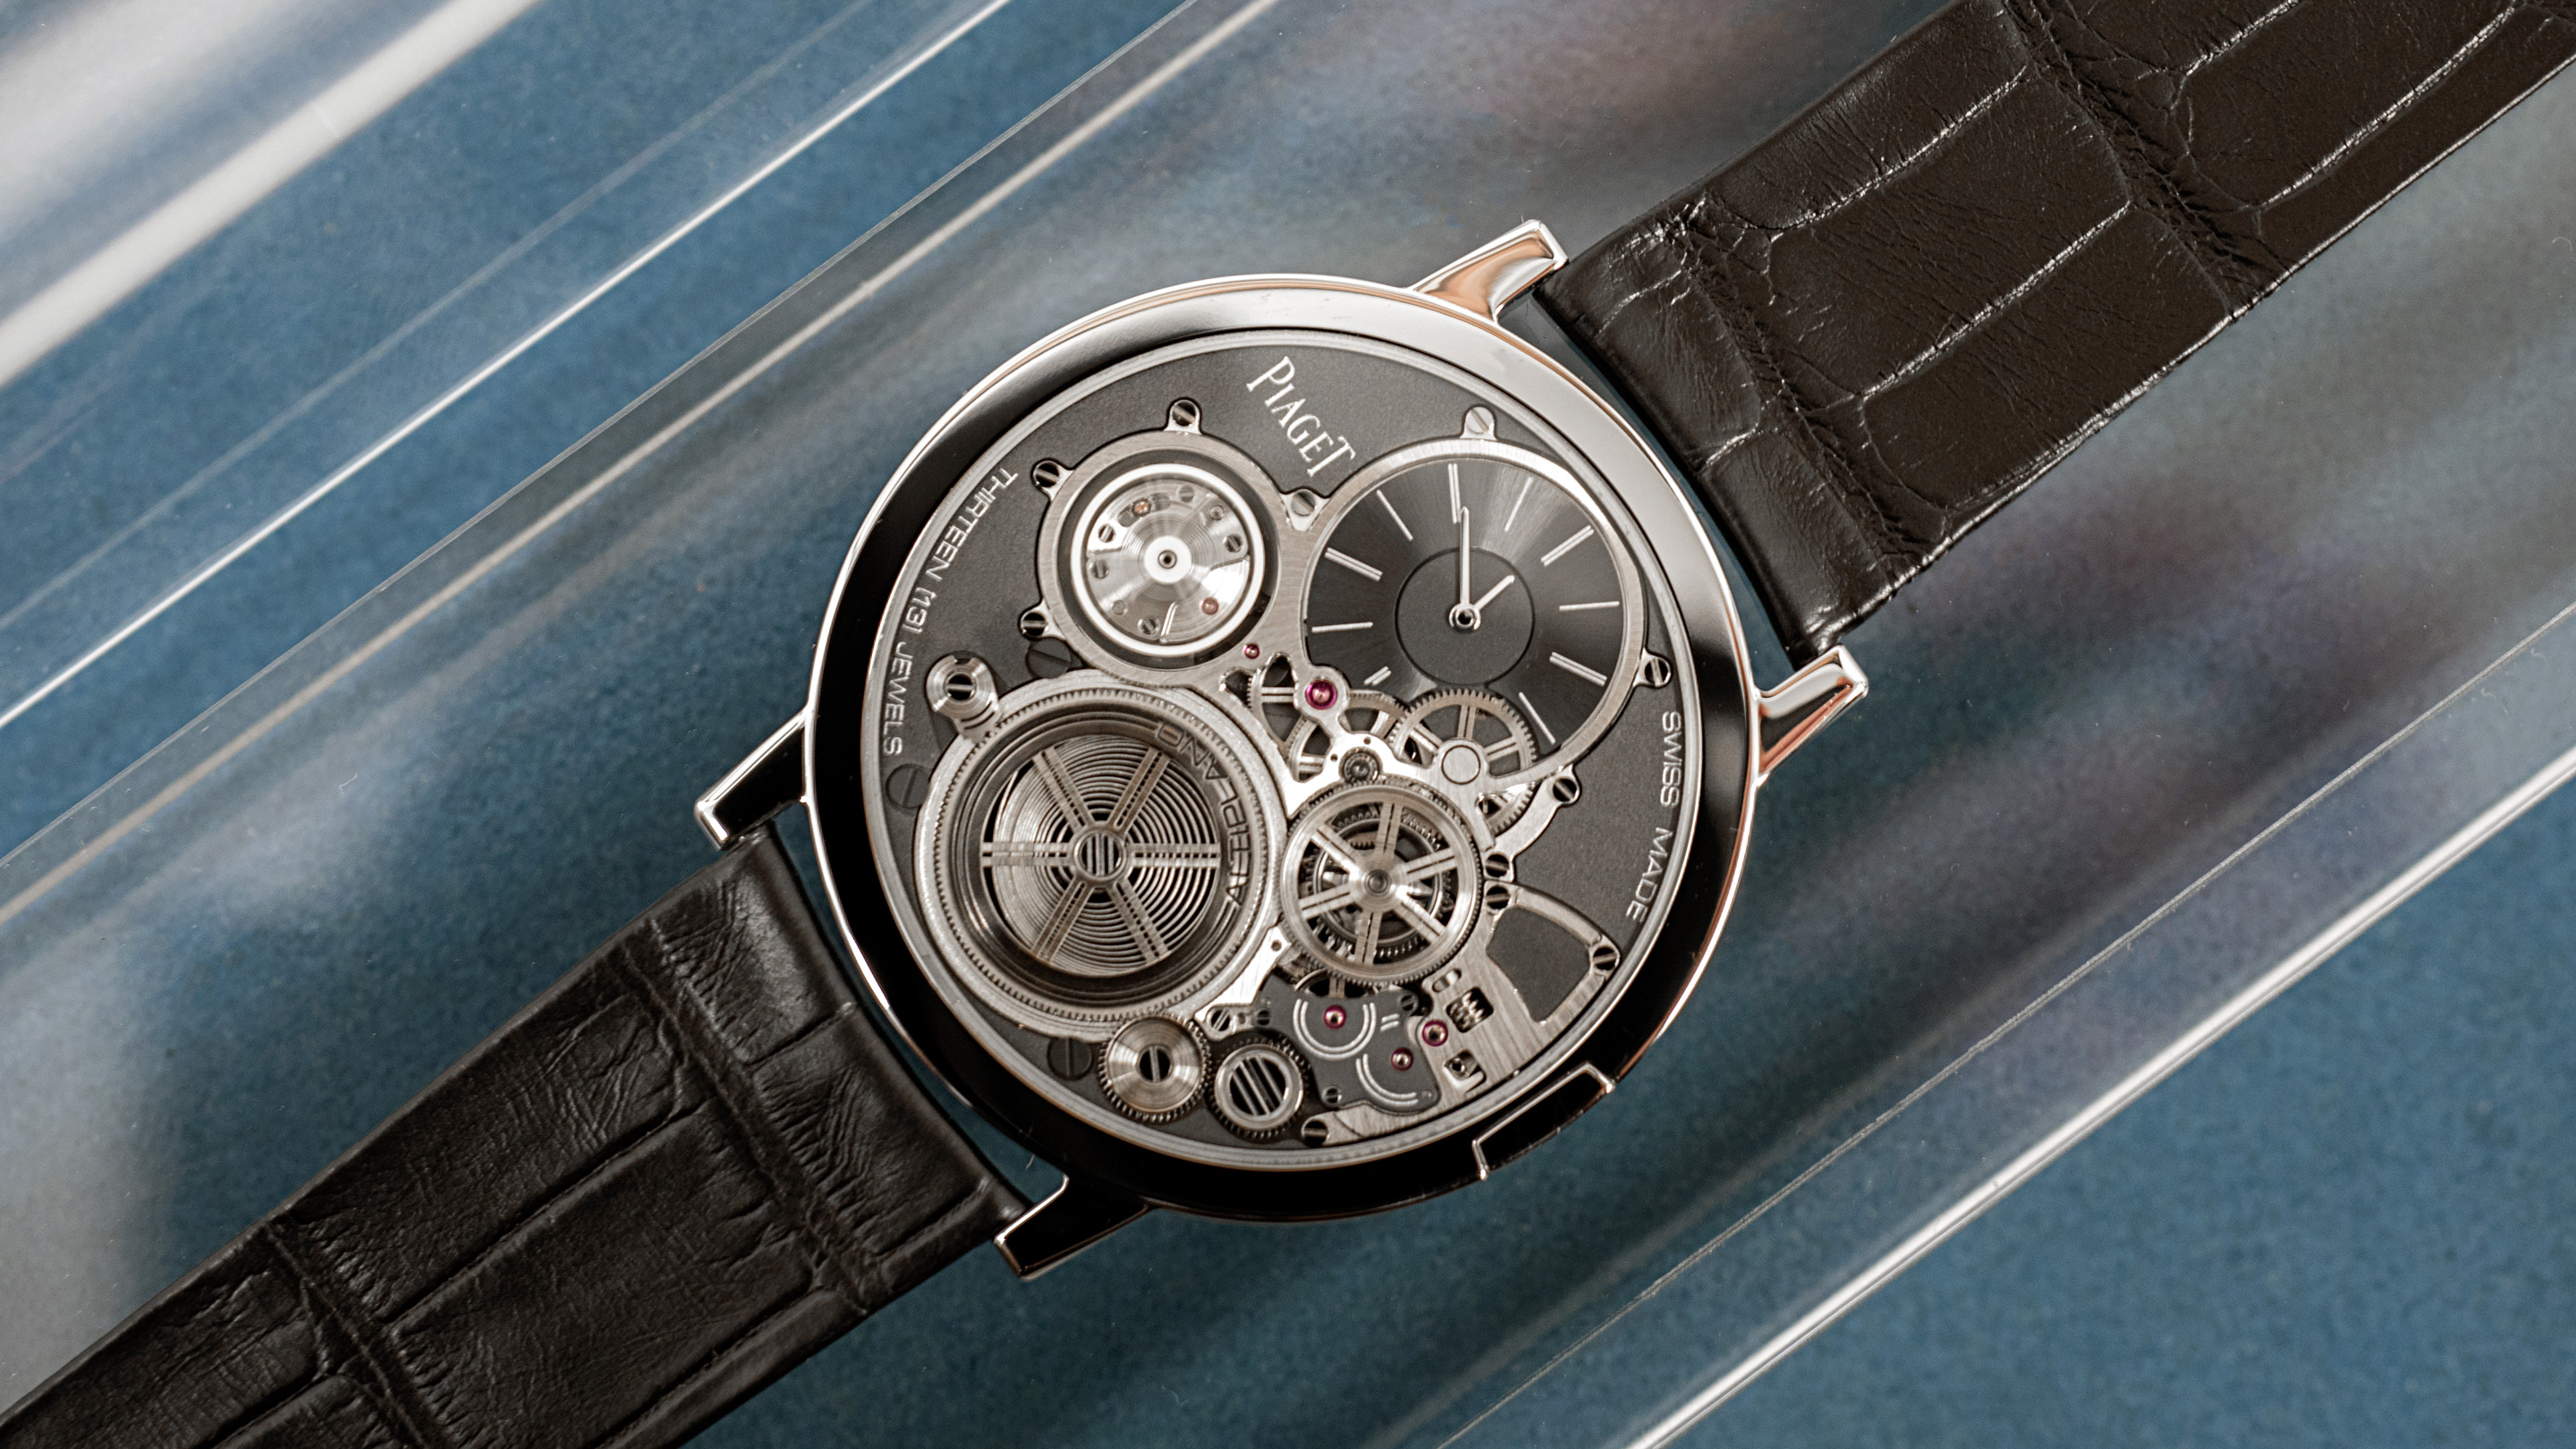 Piaget Altiplano Ultimate Concept Watch Regular Production (Live Pictures)  — WATCH COLLECTING LIFESTYLE